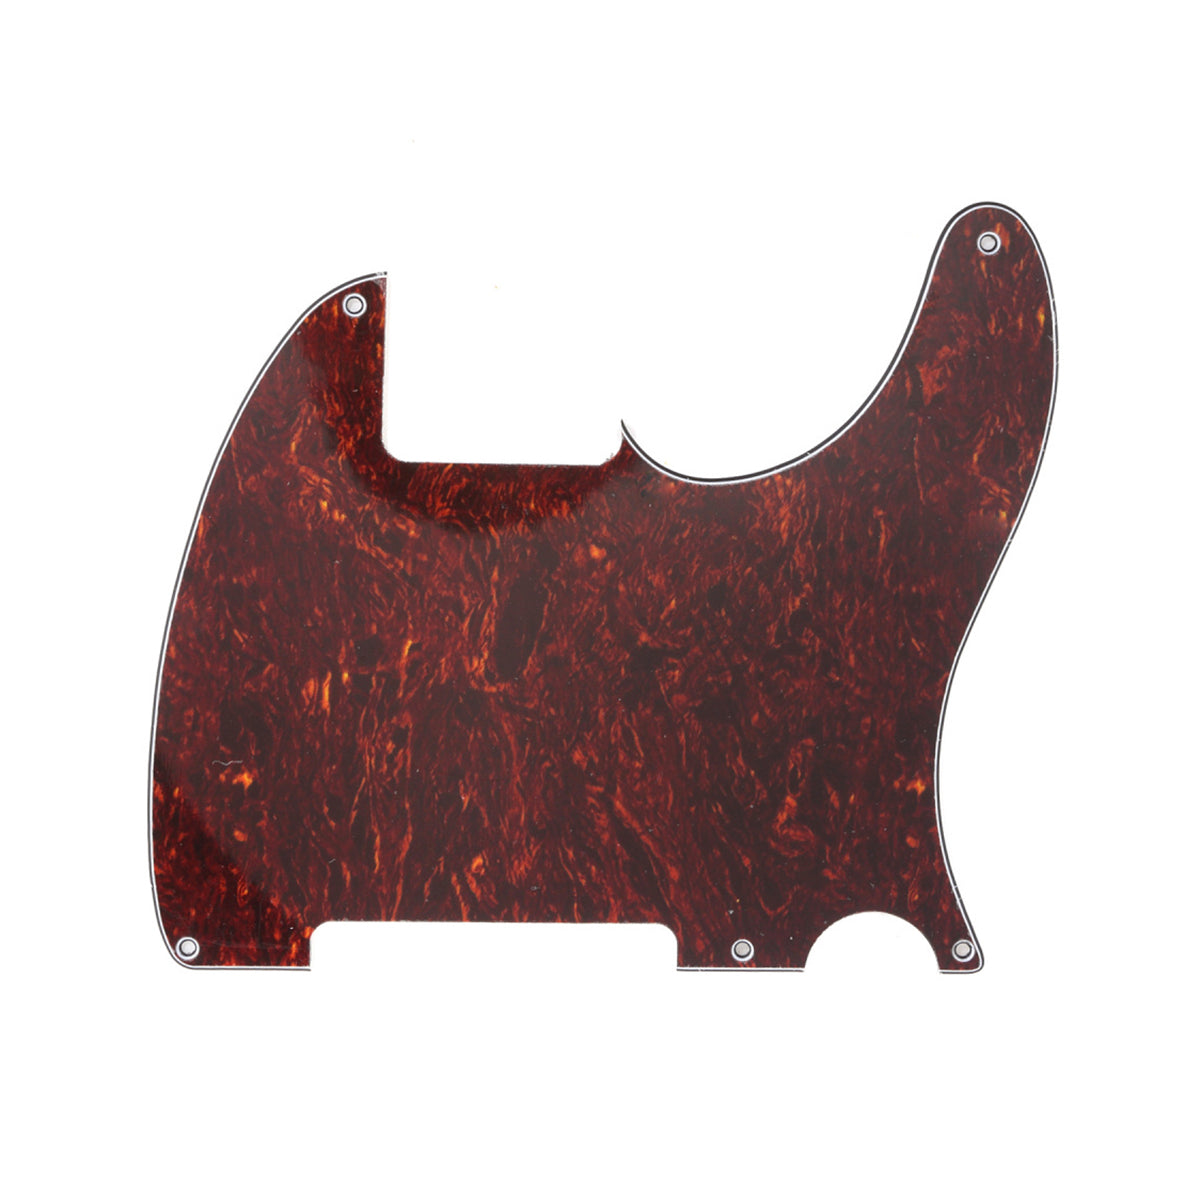 Musiclily 5 Hole Tele Pickguard Blank for Fender USA/Mexican Telecaster Esquire Guitar, 4Ply Red Tortoise